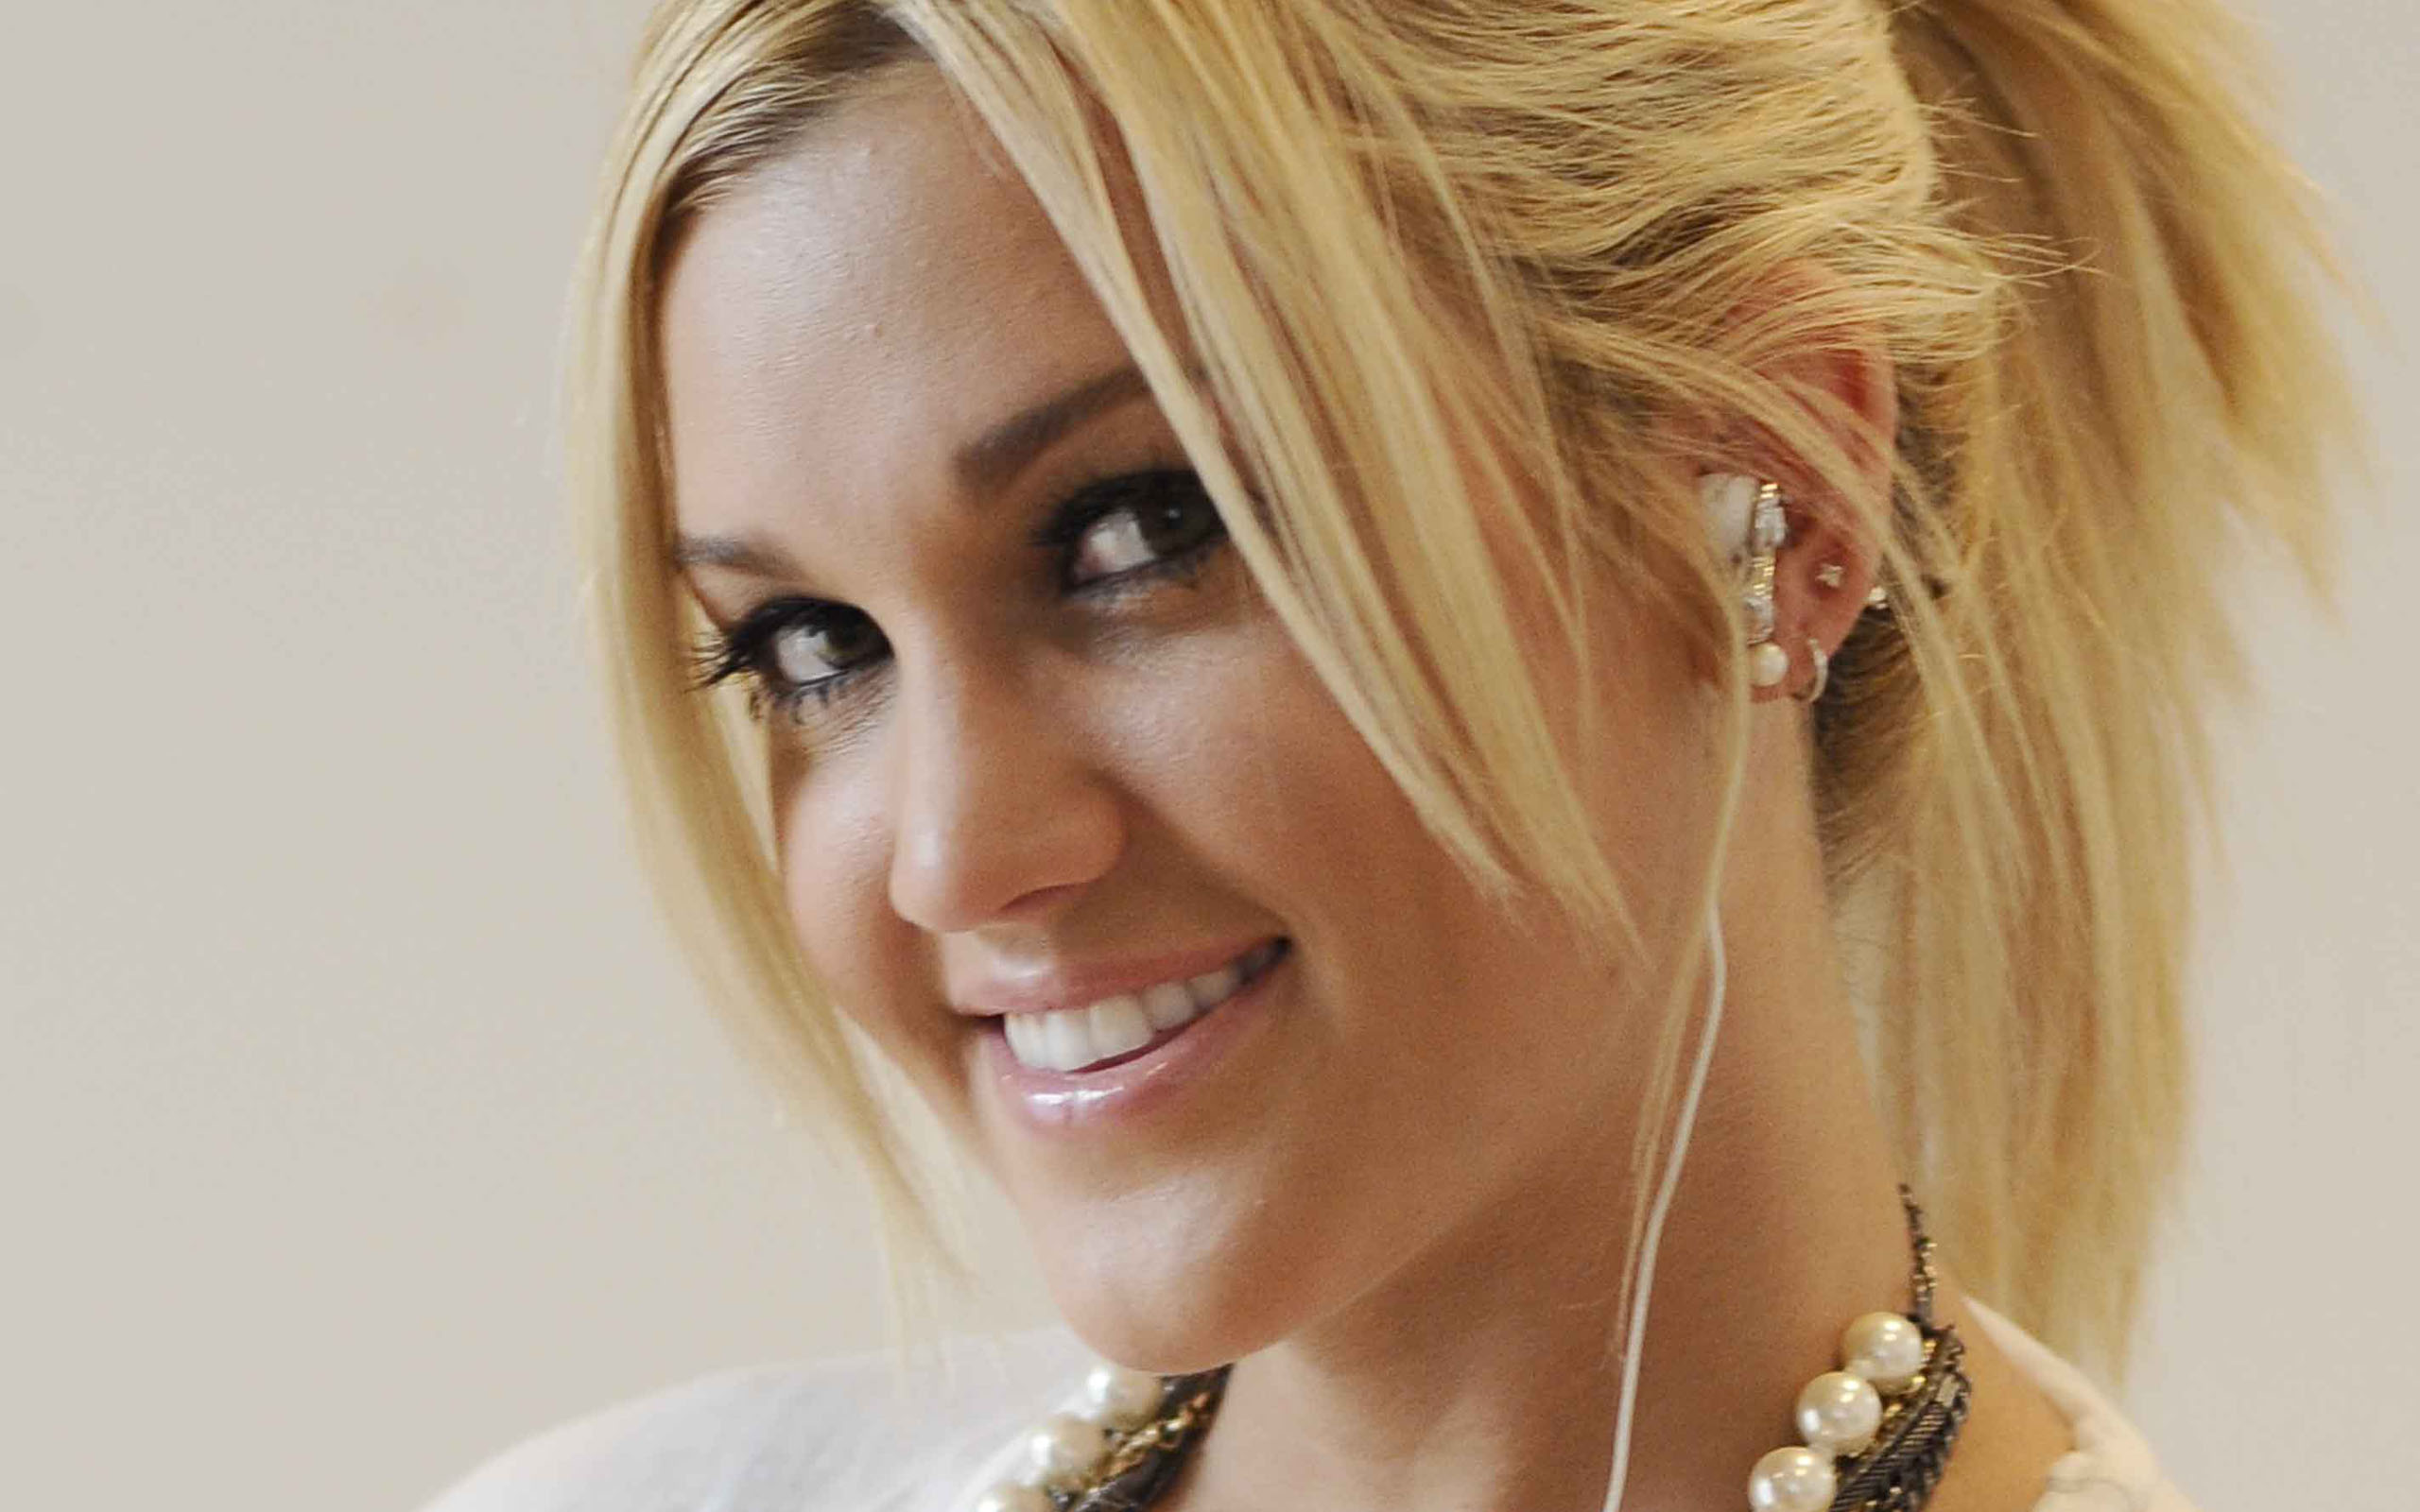 music, ashley roberts wallpapers for tablet